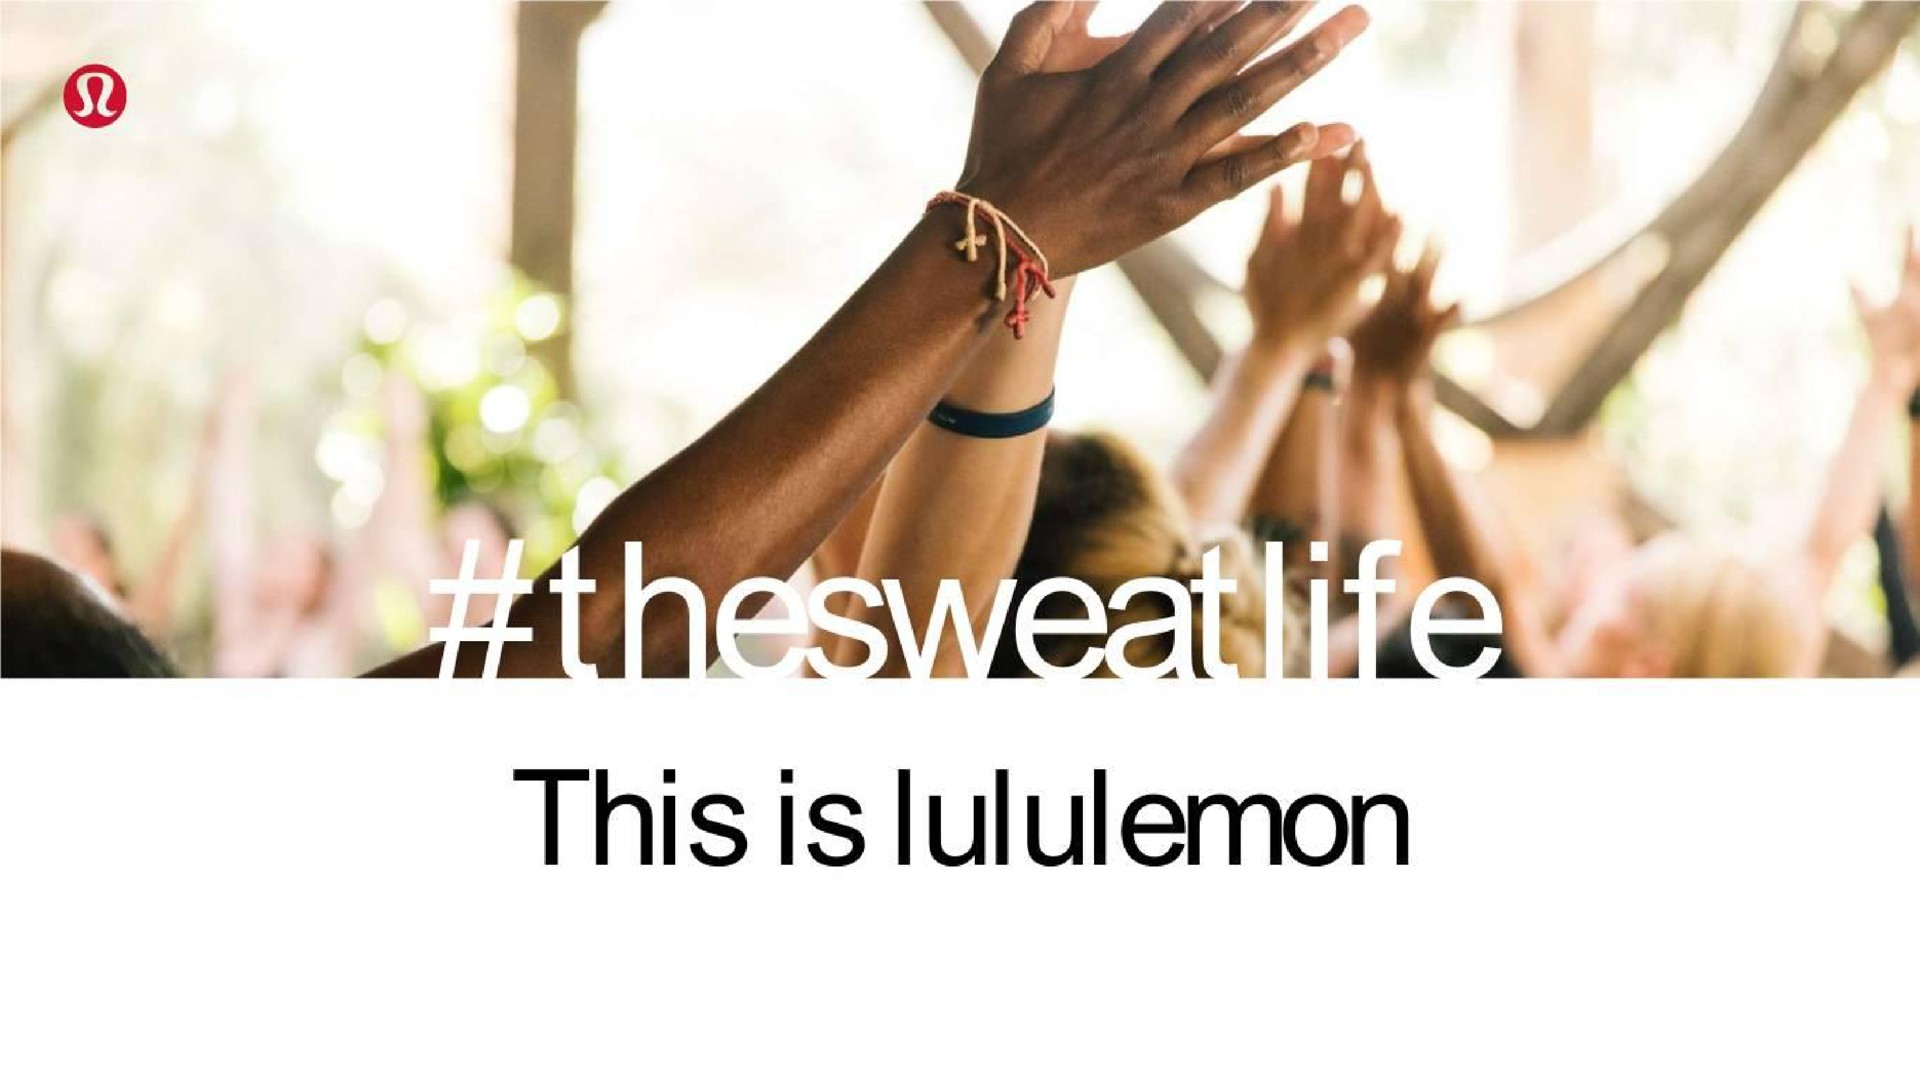 he i be this is | Lululemon